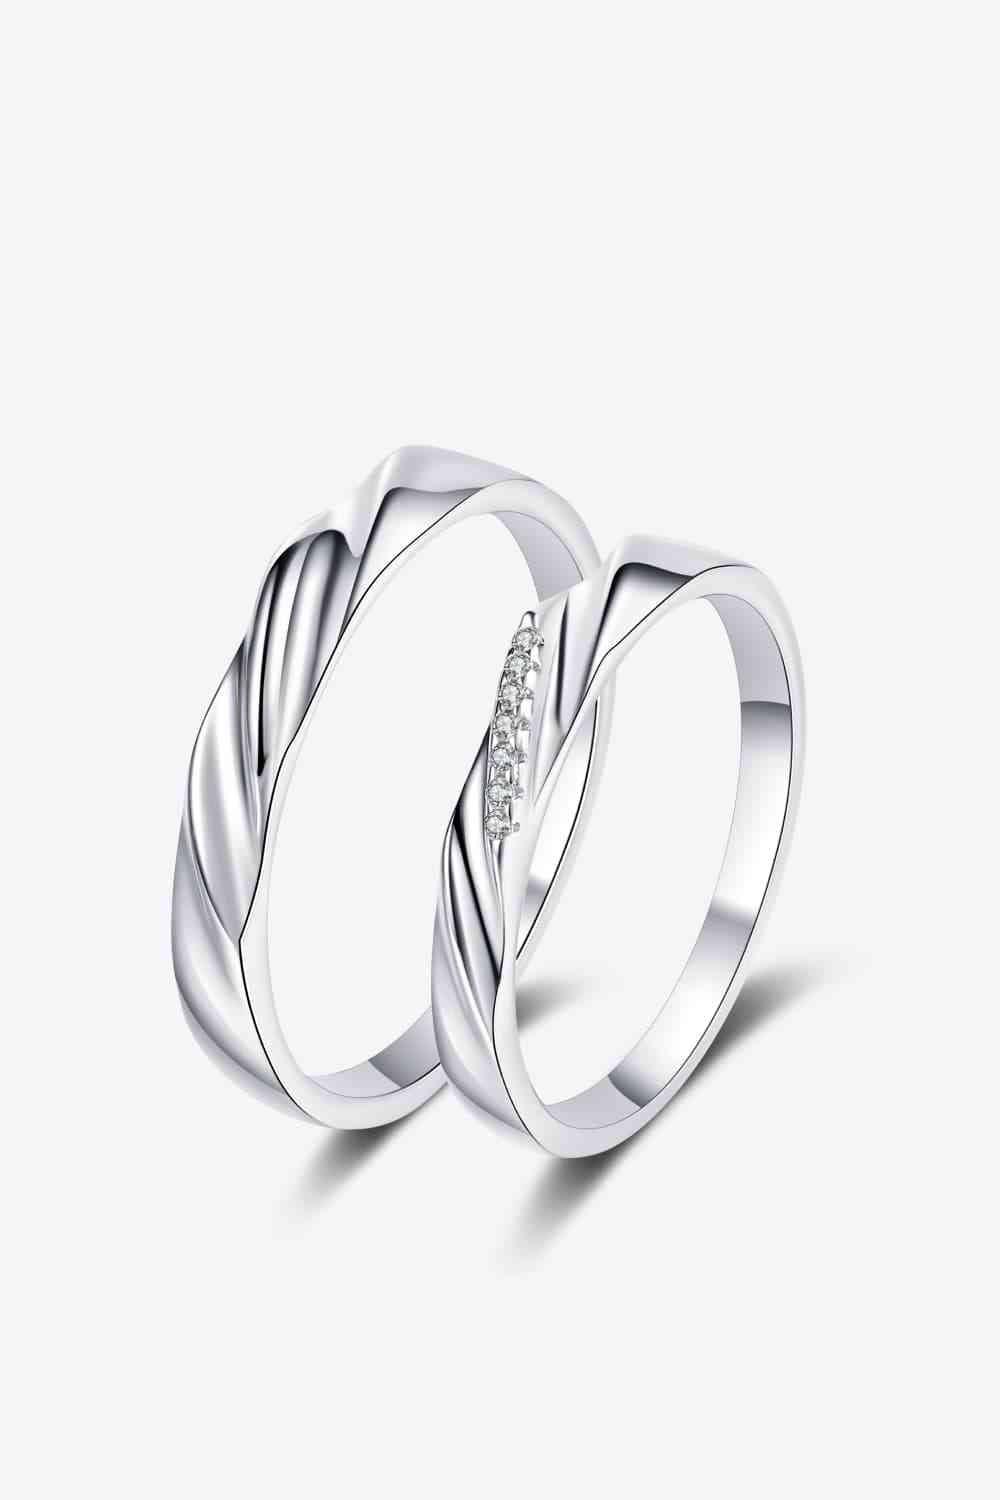 Minimalist 925 Sterling Silver Rhodium-Plated Rings - God's Girl Gifts And Apparel